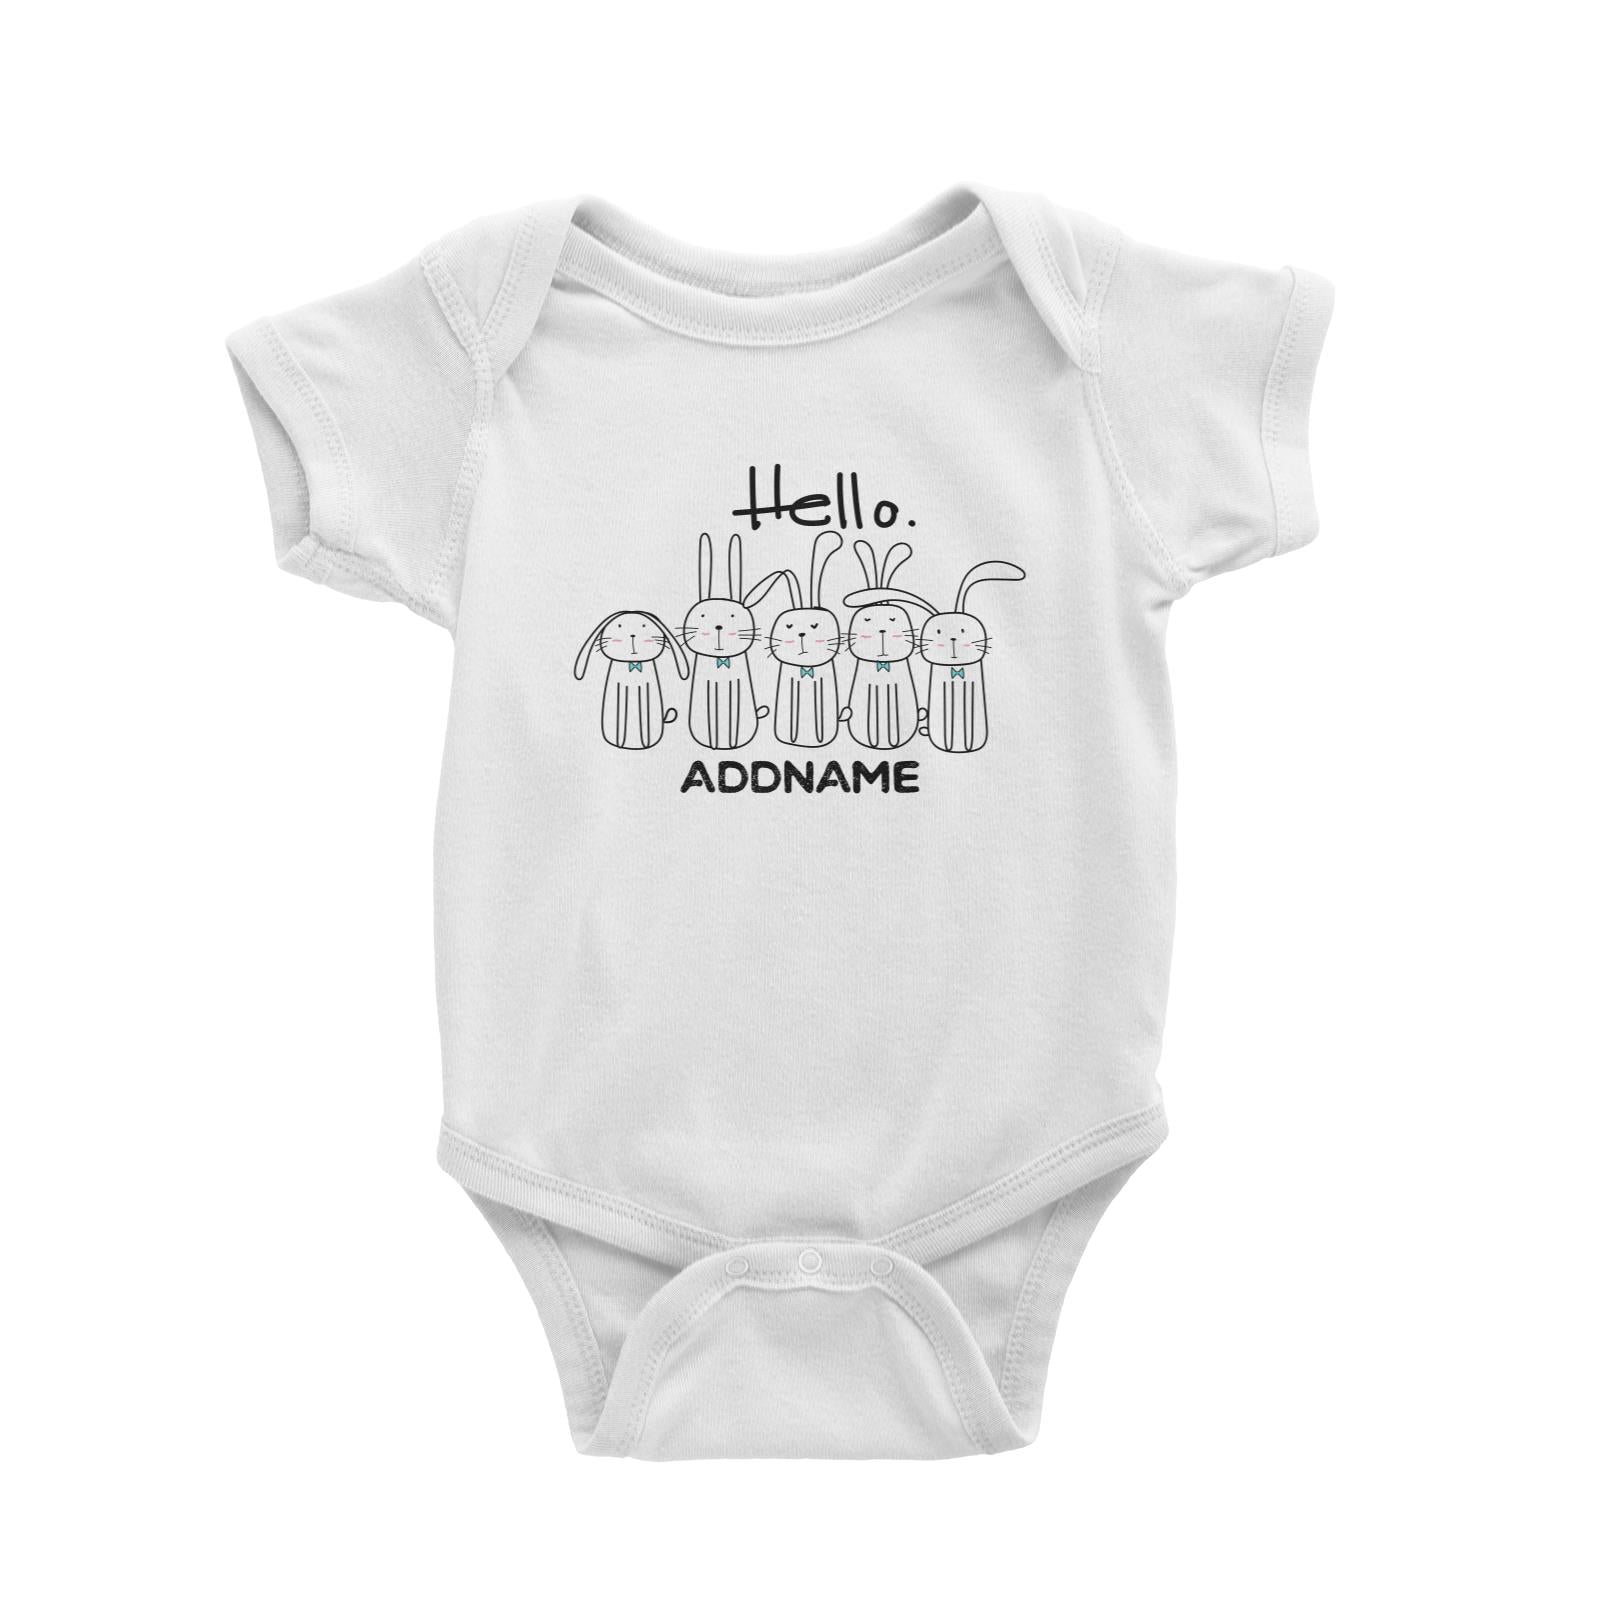 Cute Animals And Friends Series Hello Rabbits Group Addname Baby Romper